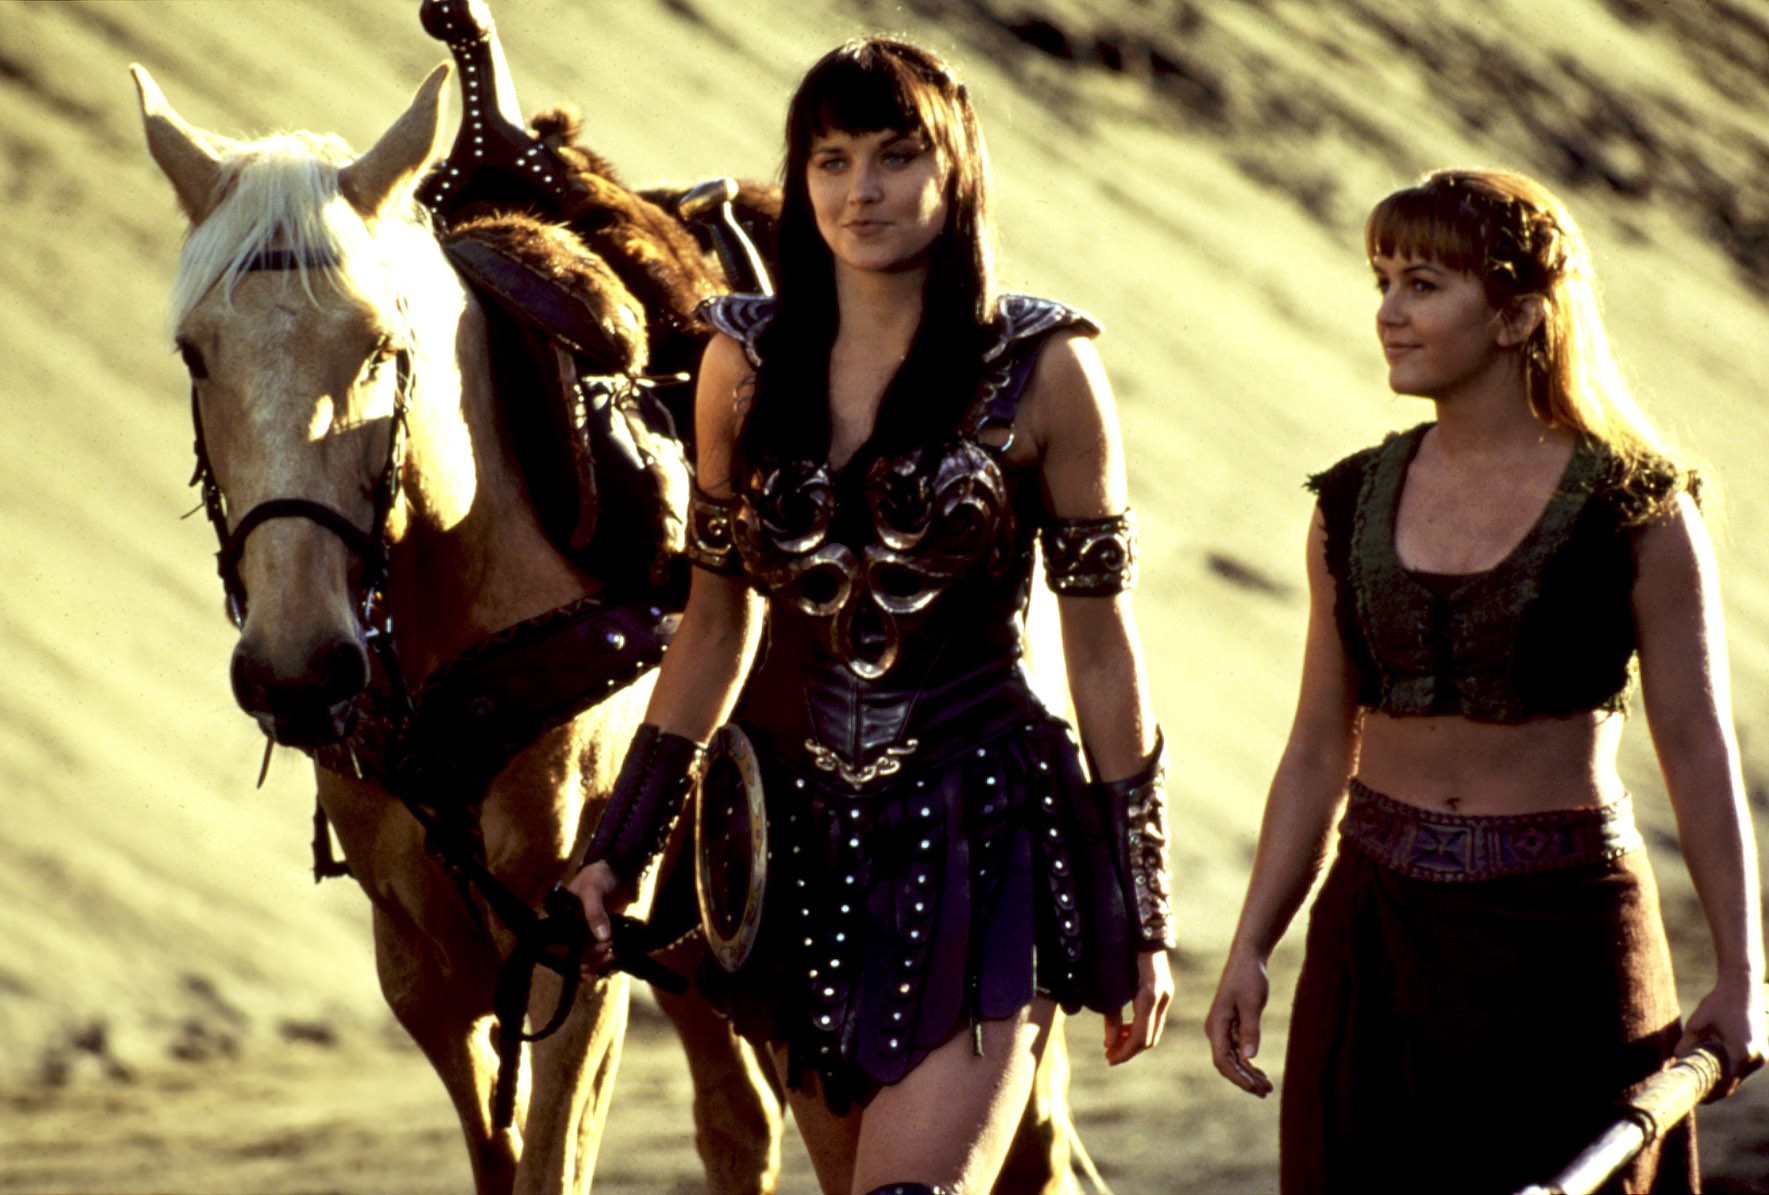 Xena Warrior Princess - Lucy Lawless, Renee O'Connor